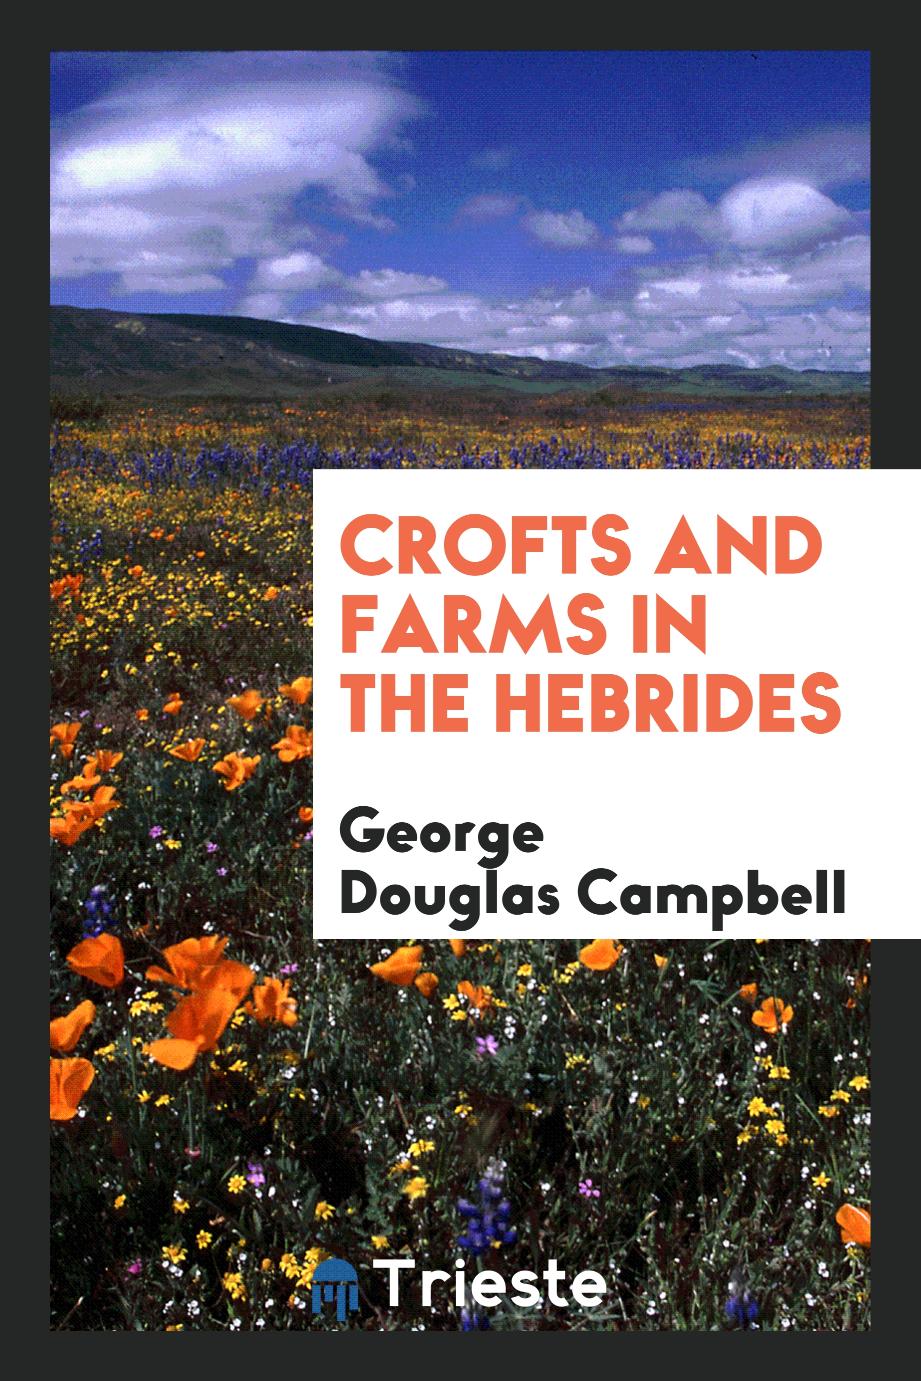 Crofts and farms in the Hebrides